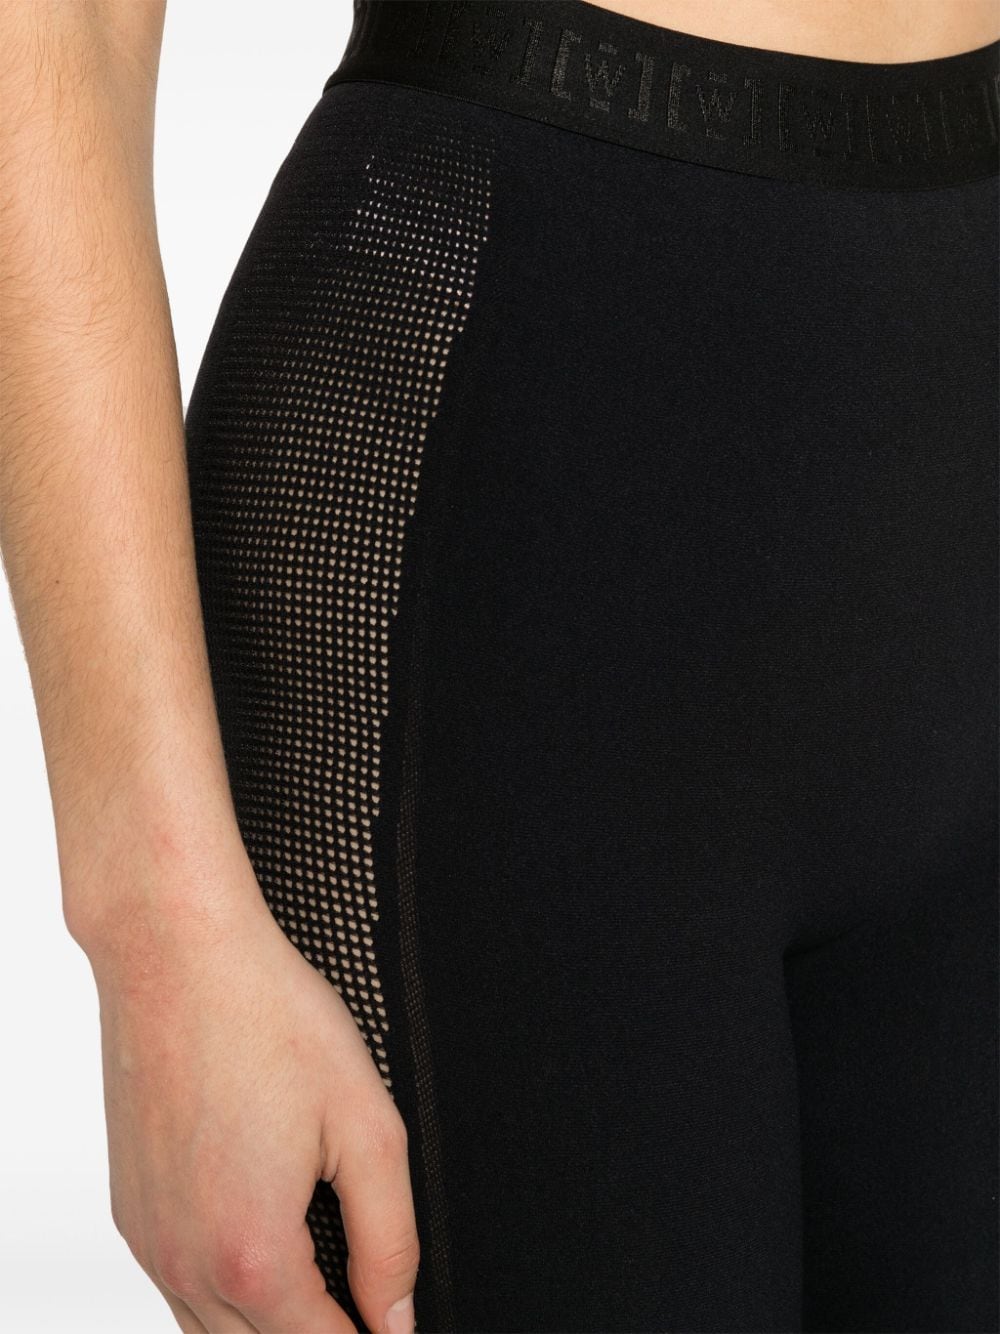 Wolford Trousers Black